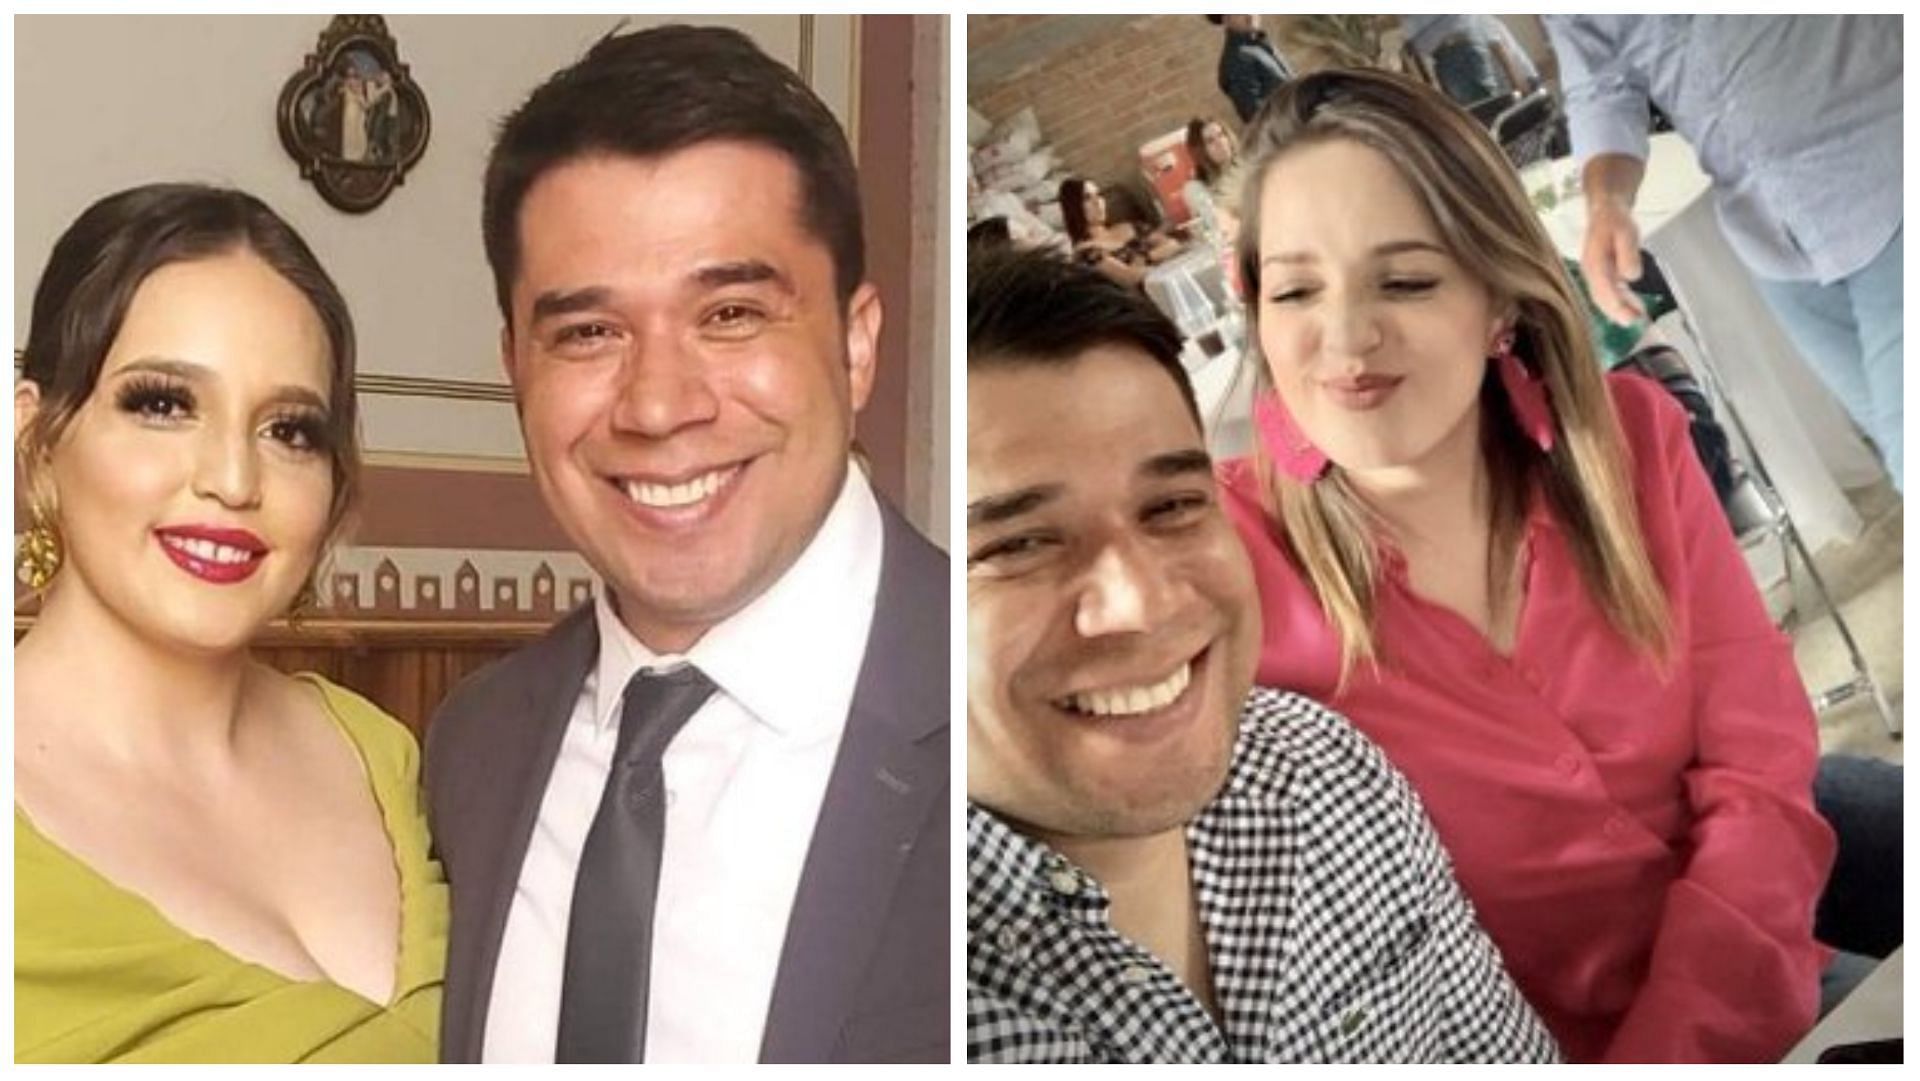 Jose Gutierrez goes missing in along with fianc&eacute;e Daniela and her sisters, (Images via @karinjohnson/Twitter)